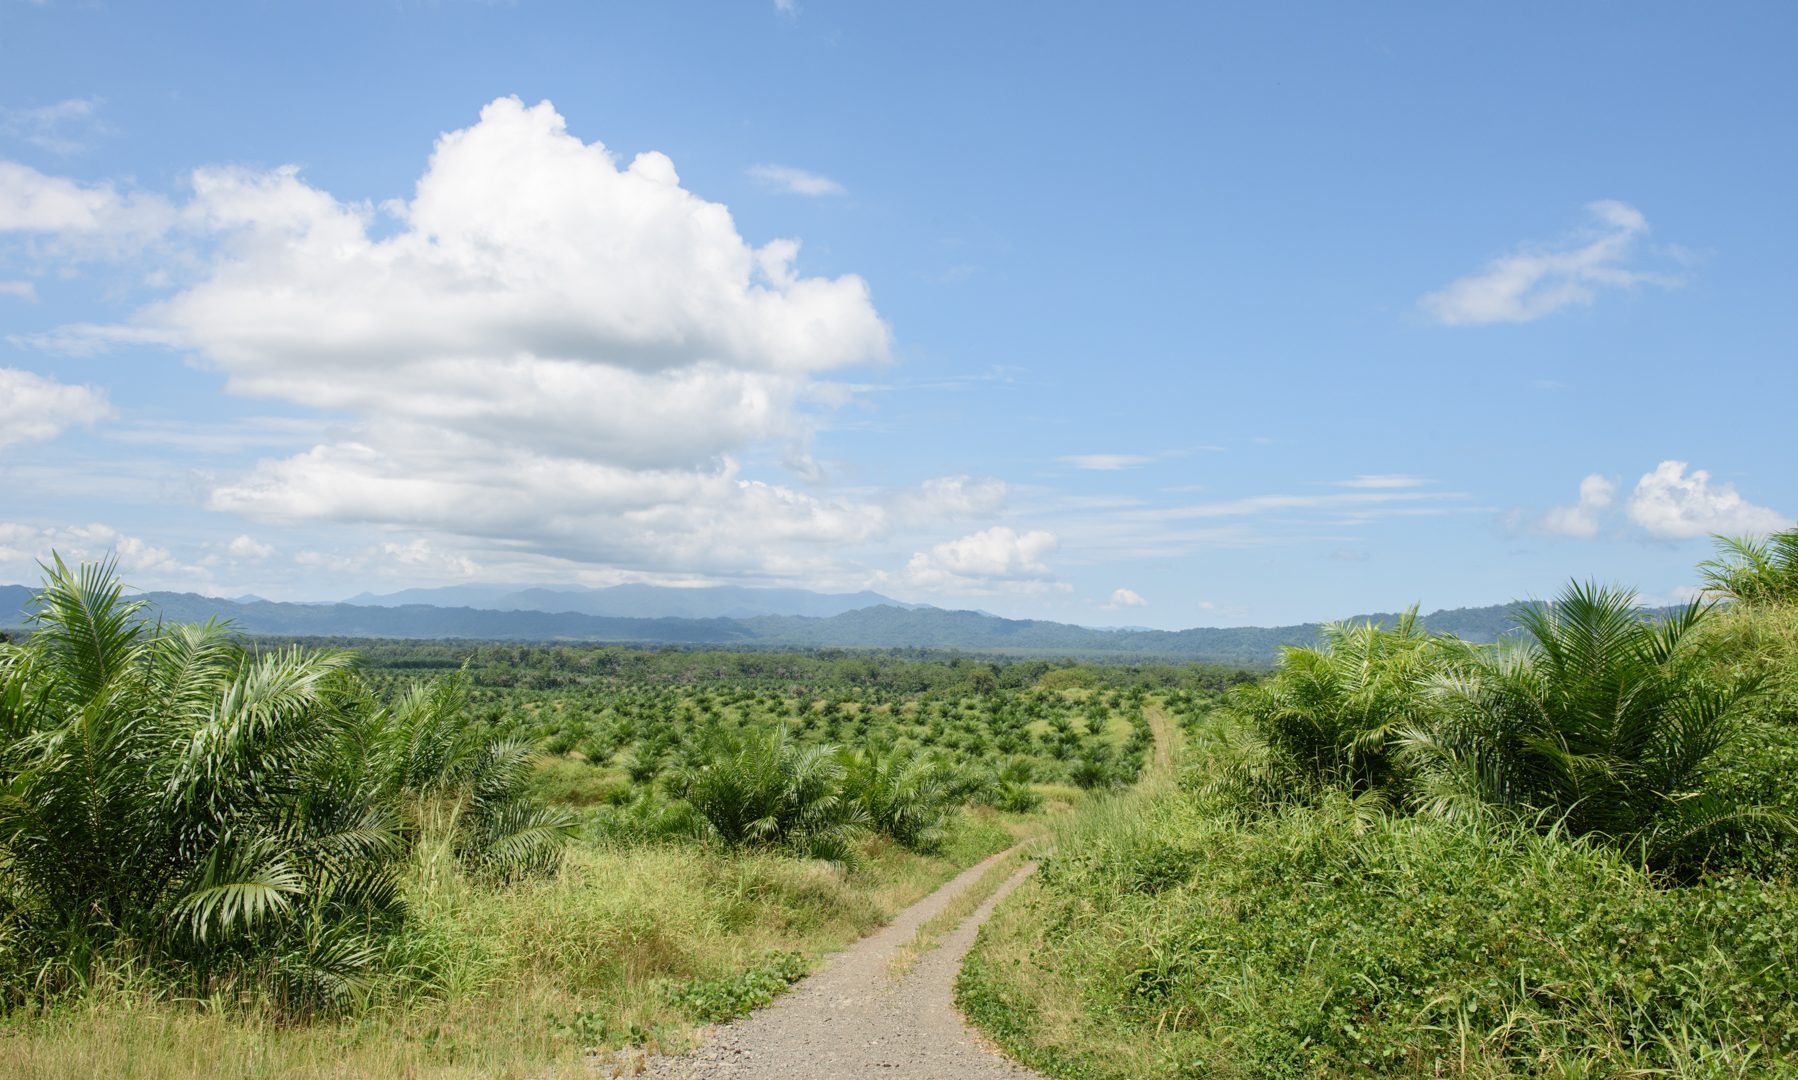 A palm oil plantation in Papua New Guinea, African oil palms, stand in regimented lines, with a dirt track running though the middle, a blue sky hangs overhead and mountains can be seen in the distance.